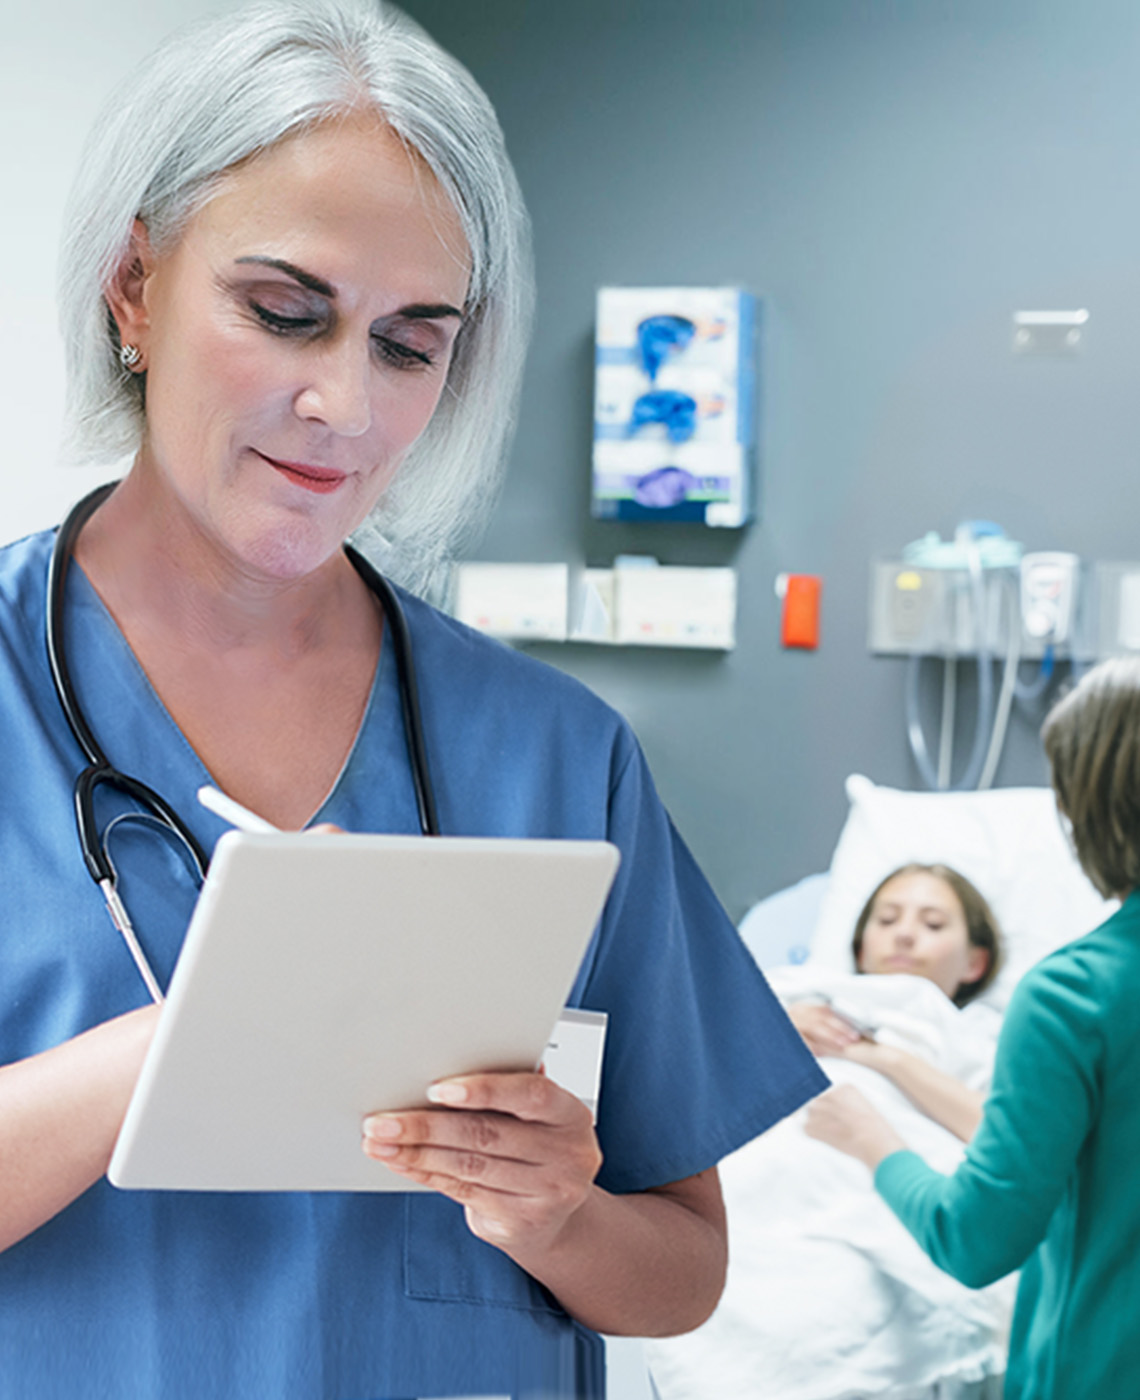 A nurse takes notes on a tablet with a stylus. Behind her, a patient lies in a hospital bed with a visitor at her bedside.